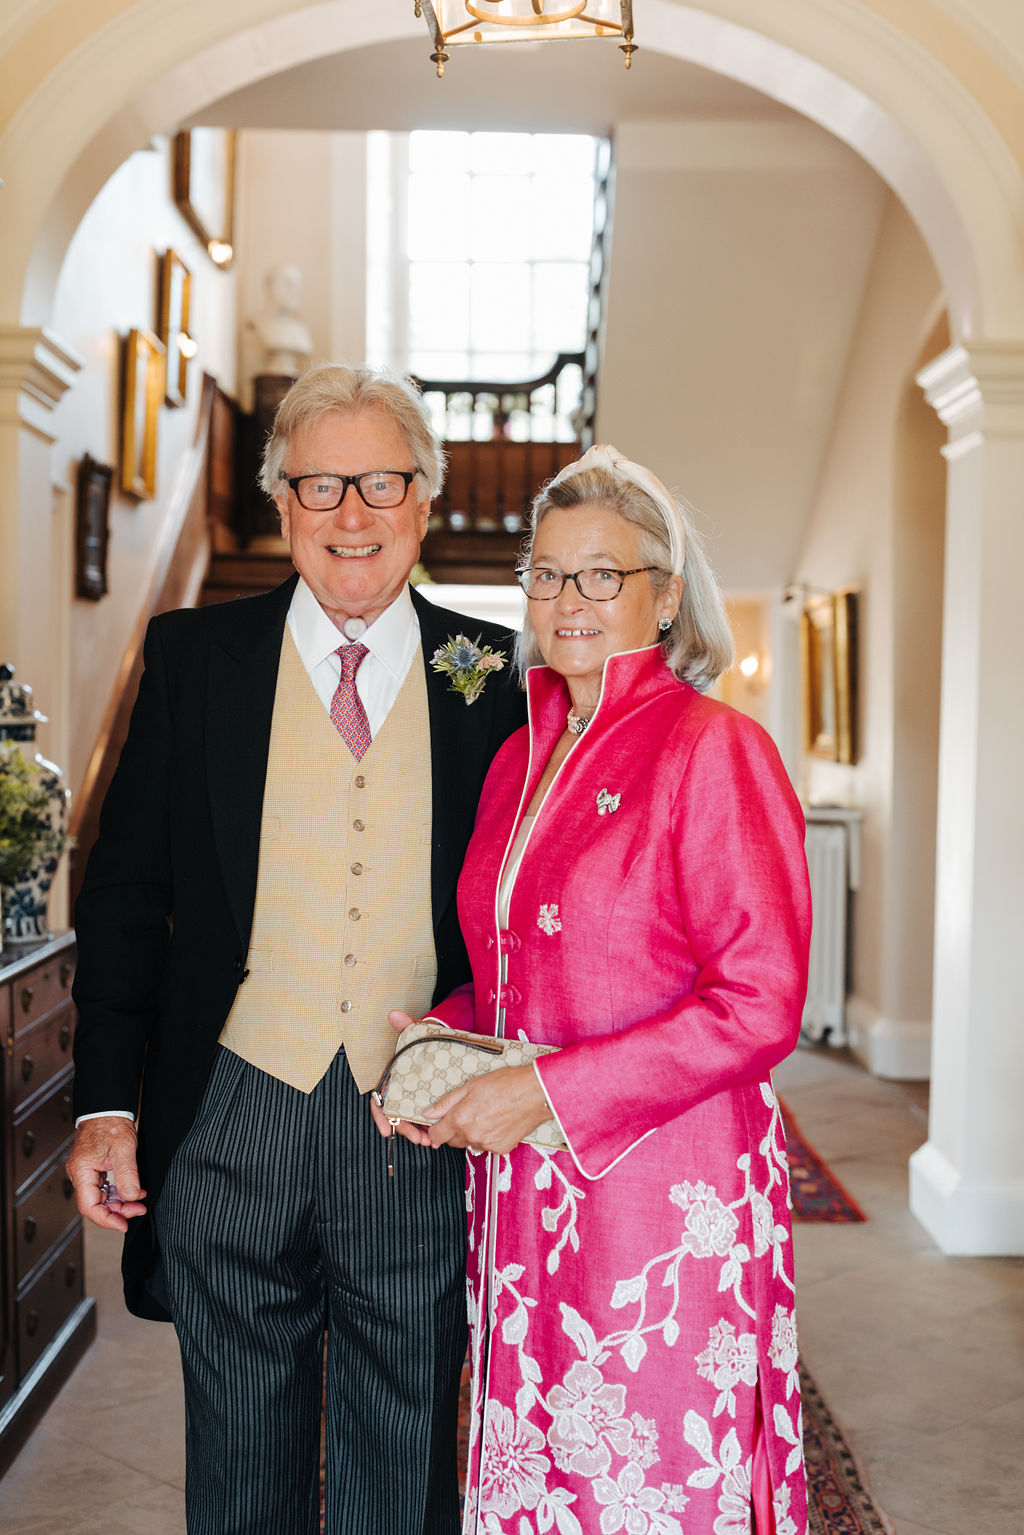 A man wearing a morning suit stands next to his wife who is wearing a pink floral outfit dressed for a wedding with an antique wooden staircase in the background behind them.